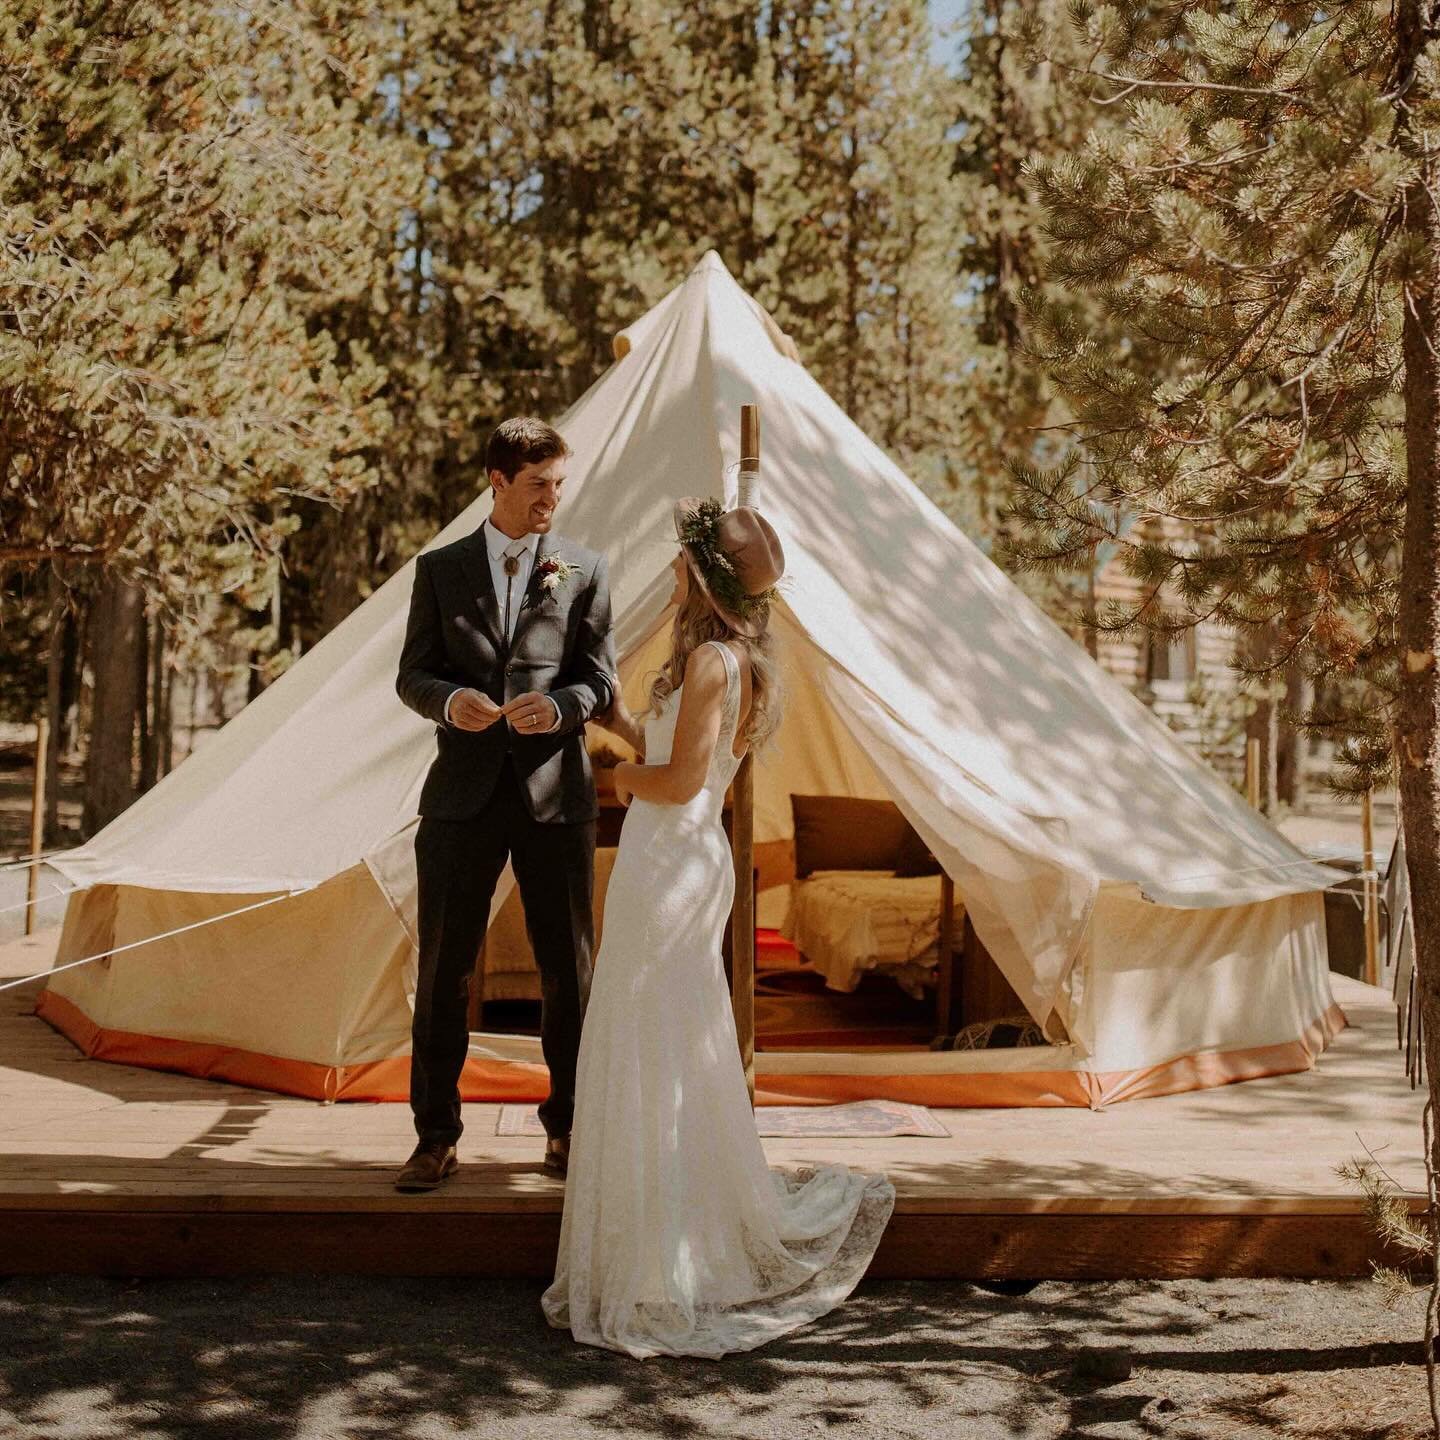 Taking some time to update pricing guides and came across these sweet photos in the archives! What an epic day with these two ☀️ 
&bull;
&bull;
#elklakelodge #glampingwedding #campingwedding #elklakewedding #easternoregonwedding #easternoregonwedding